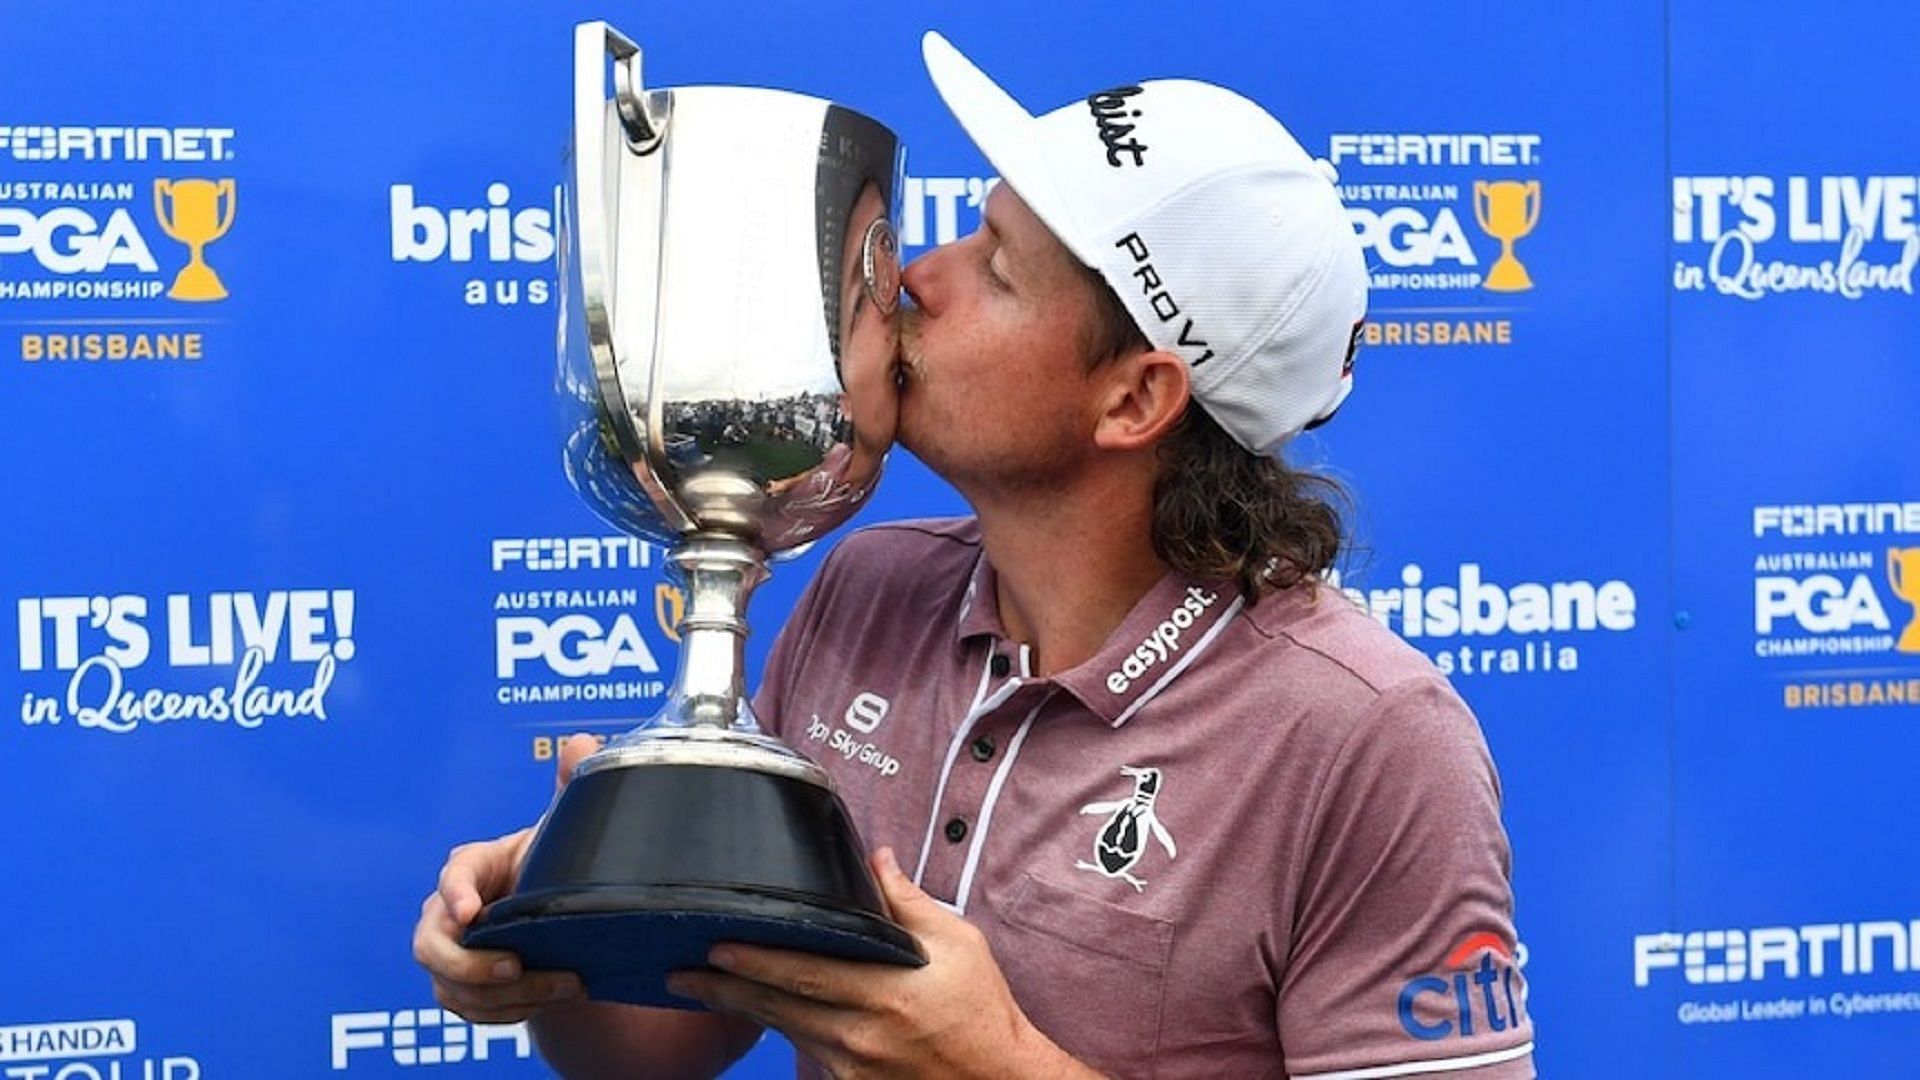 Cameron Smith is the defending champion at the Fortinet Australian PGA Championship